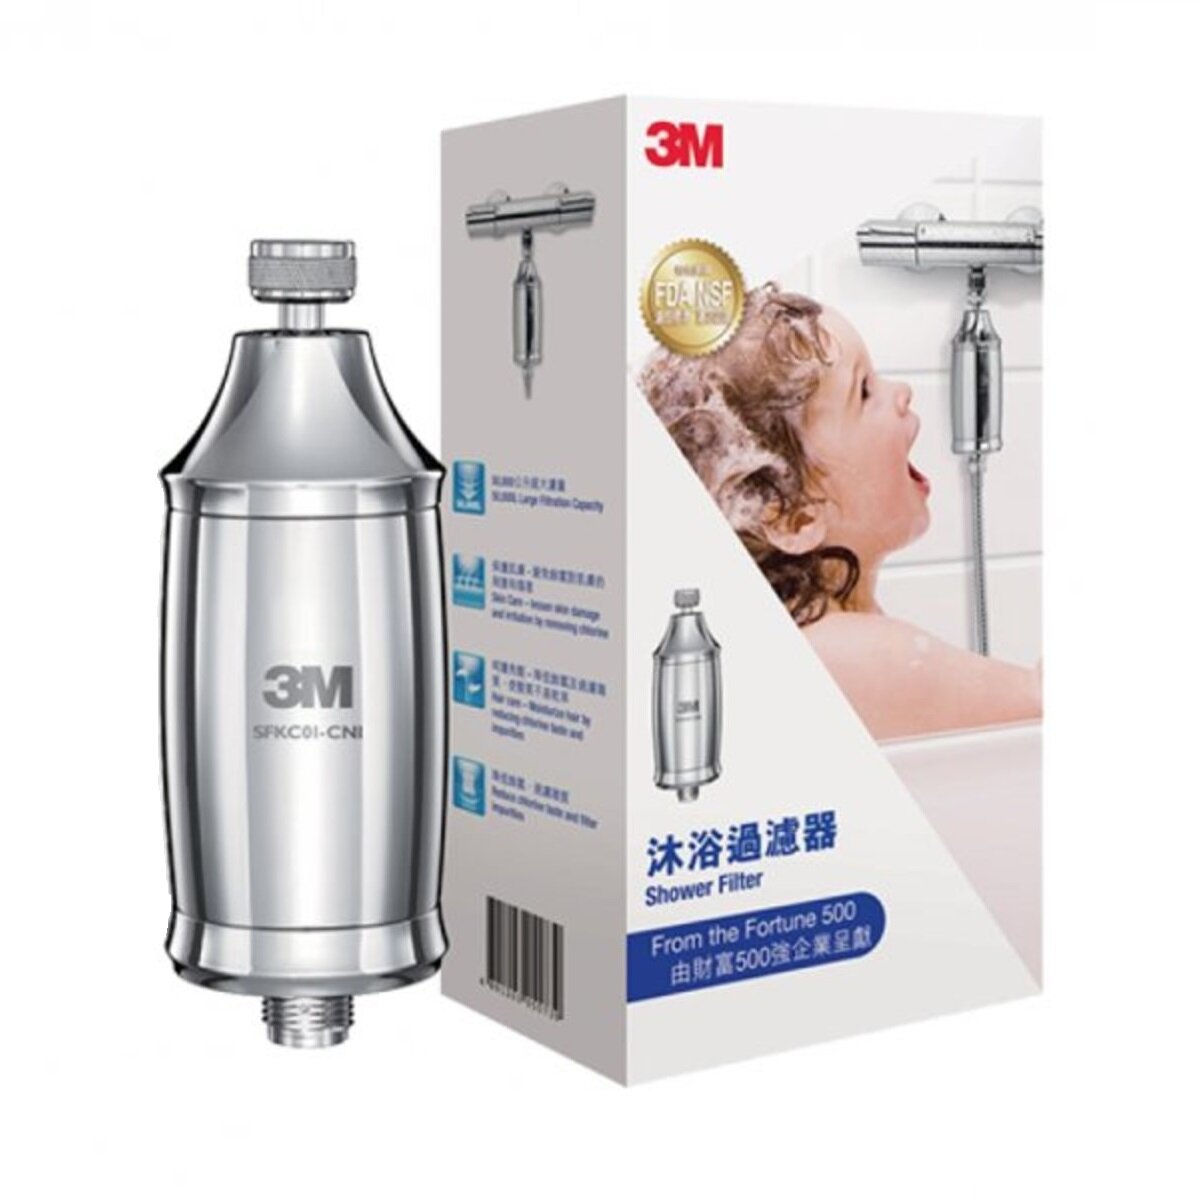 3M™ - 3M™ Bath Filter SFKC01-CN1 (the water filter housing can be registered and maintained for one year)